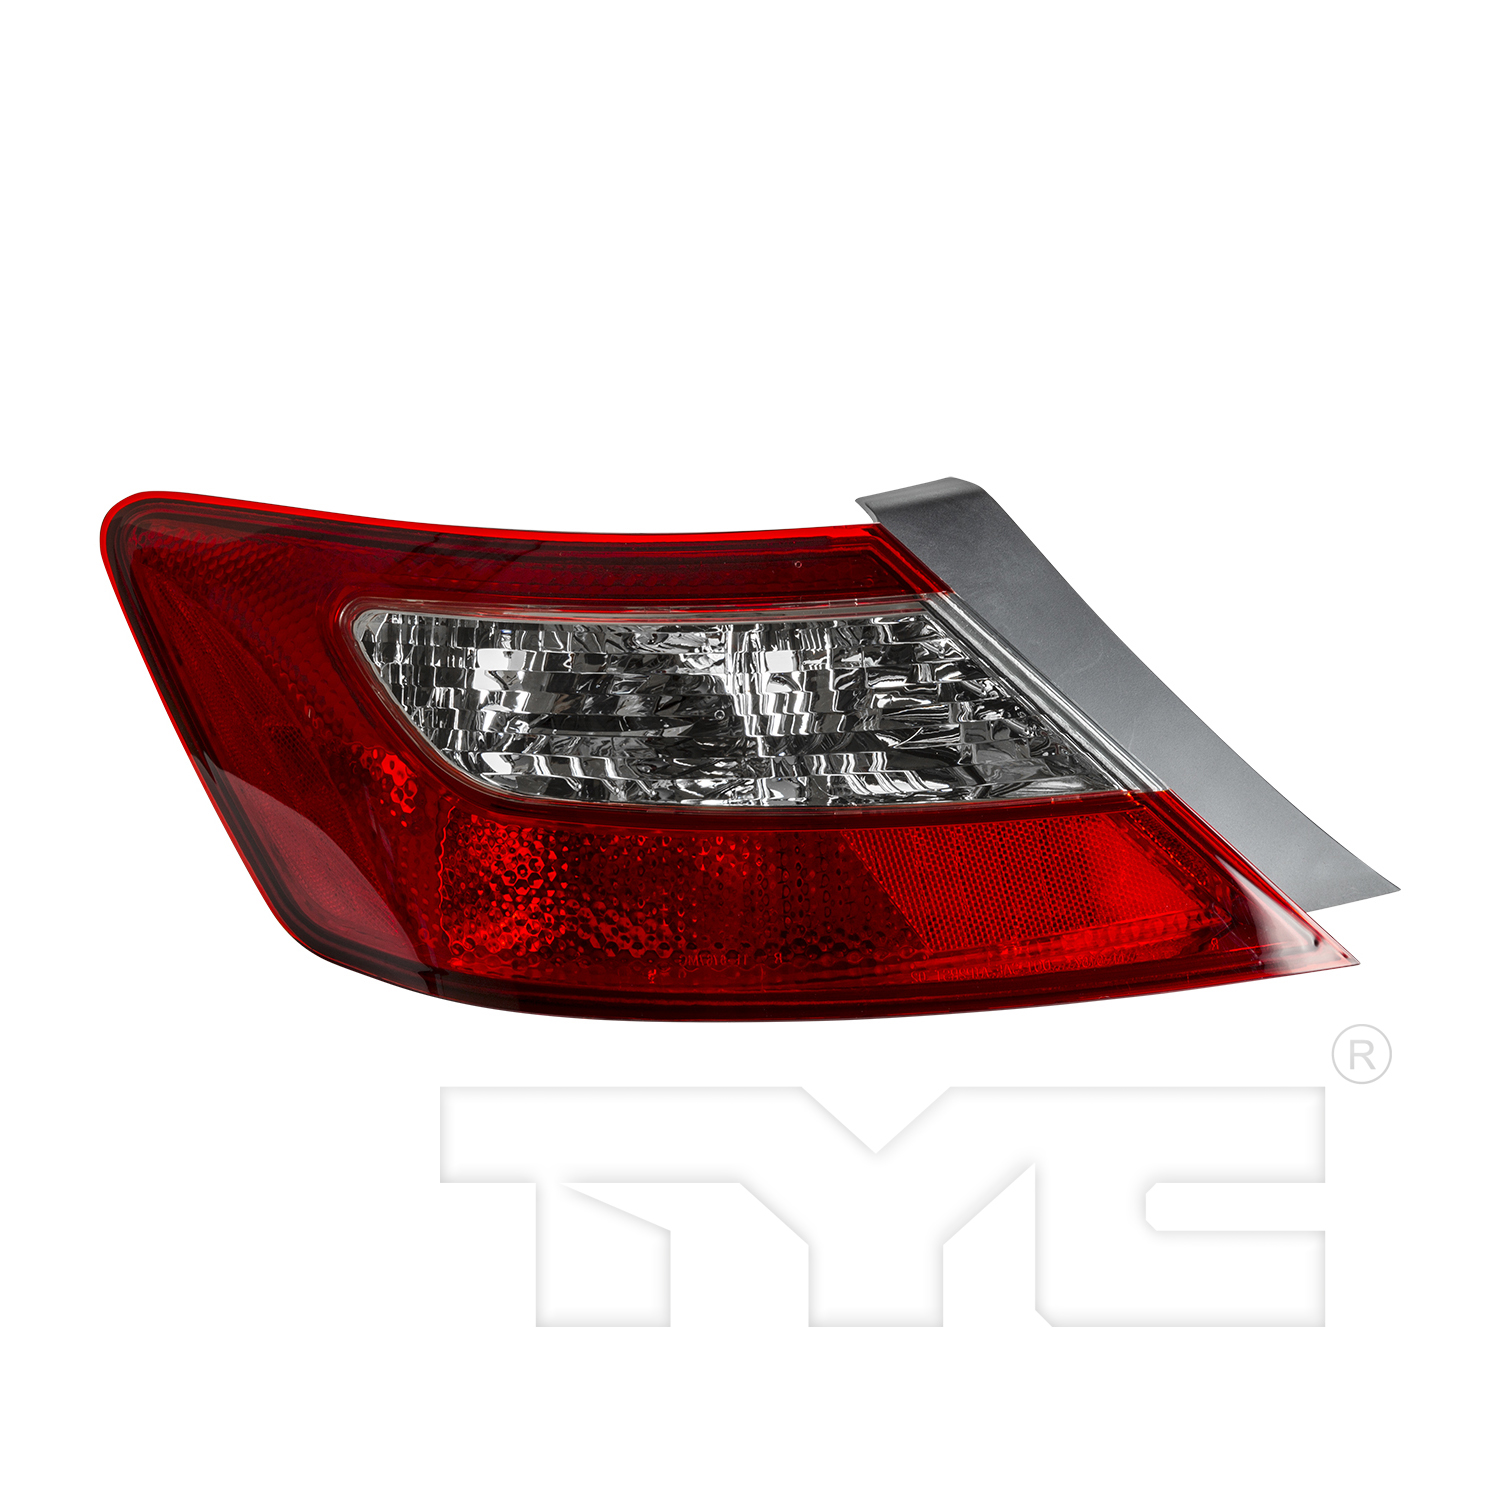 Aftermarket TAILLIGHTS for HONDA - CIVIC, CIVIC,09-11,LT Taillamp lens/housing